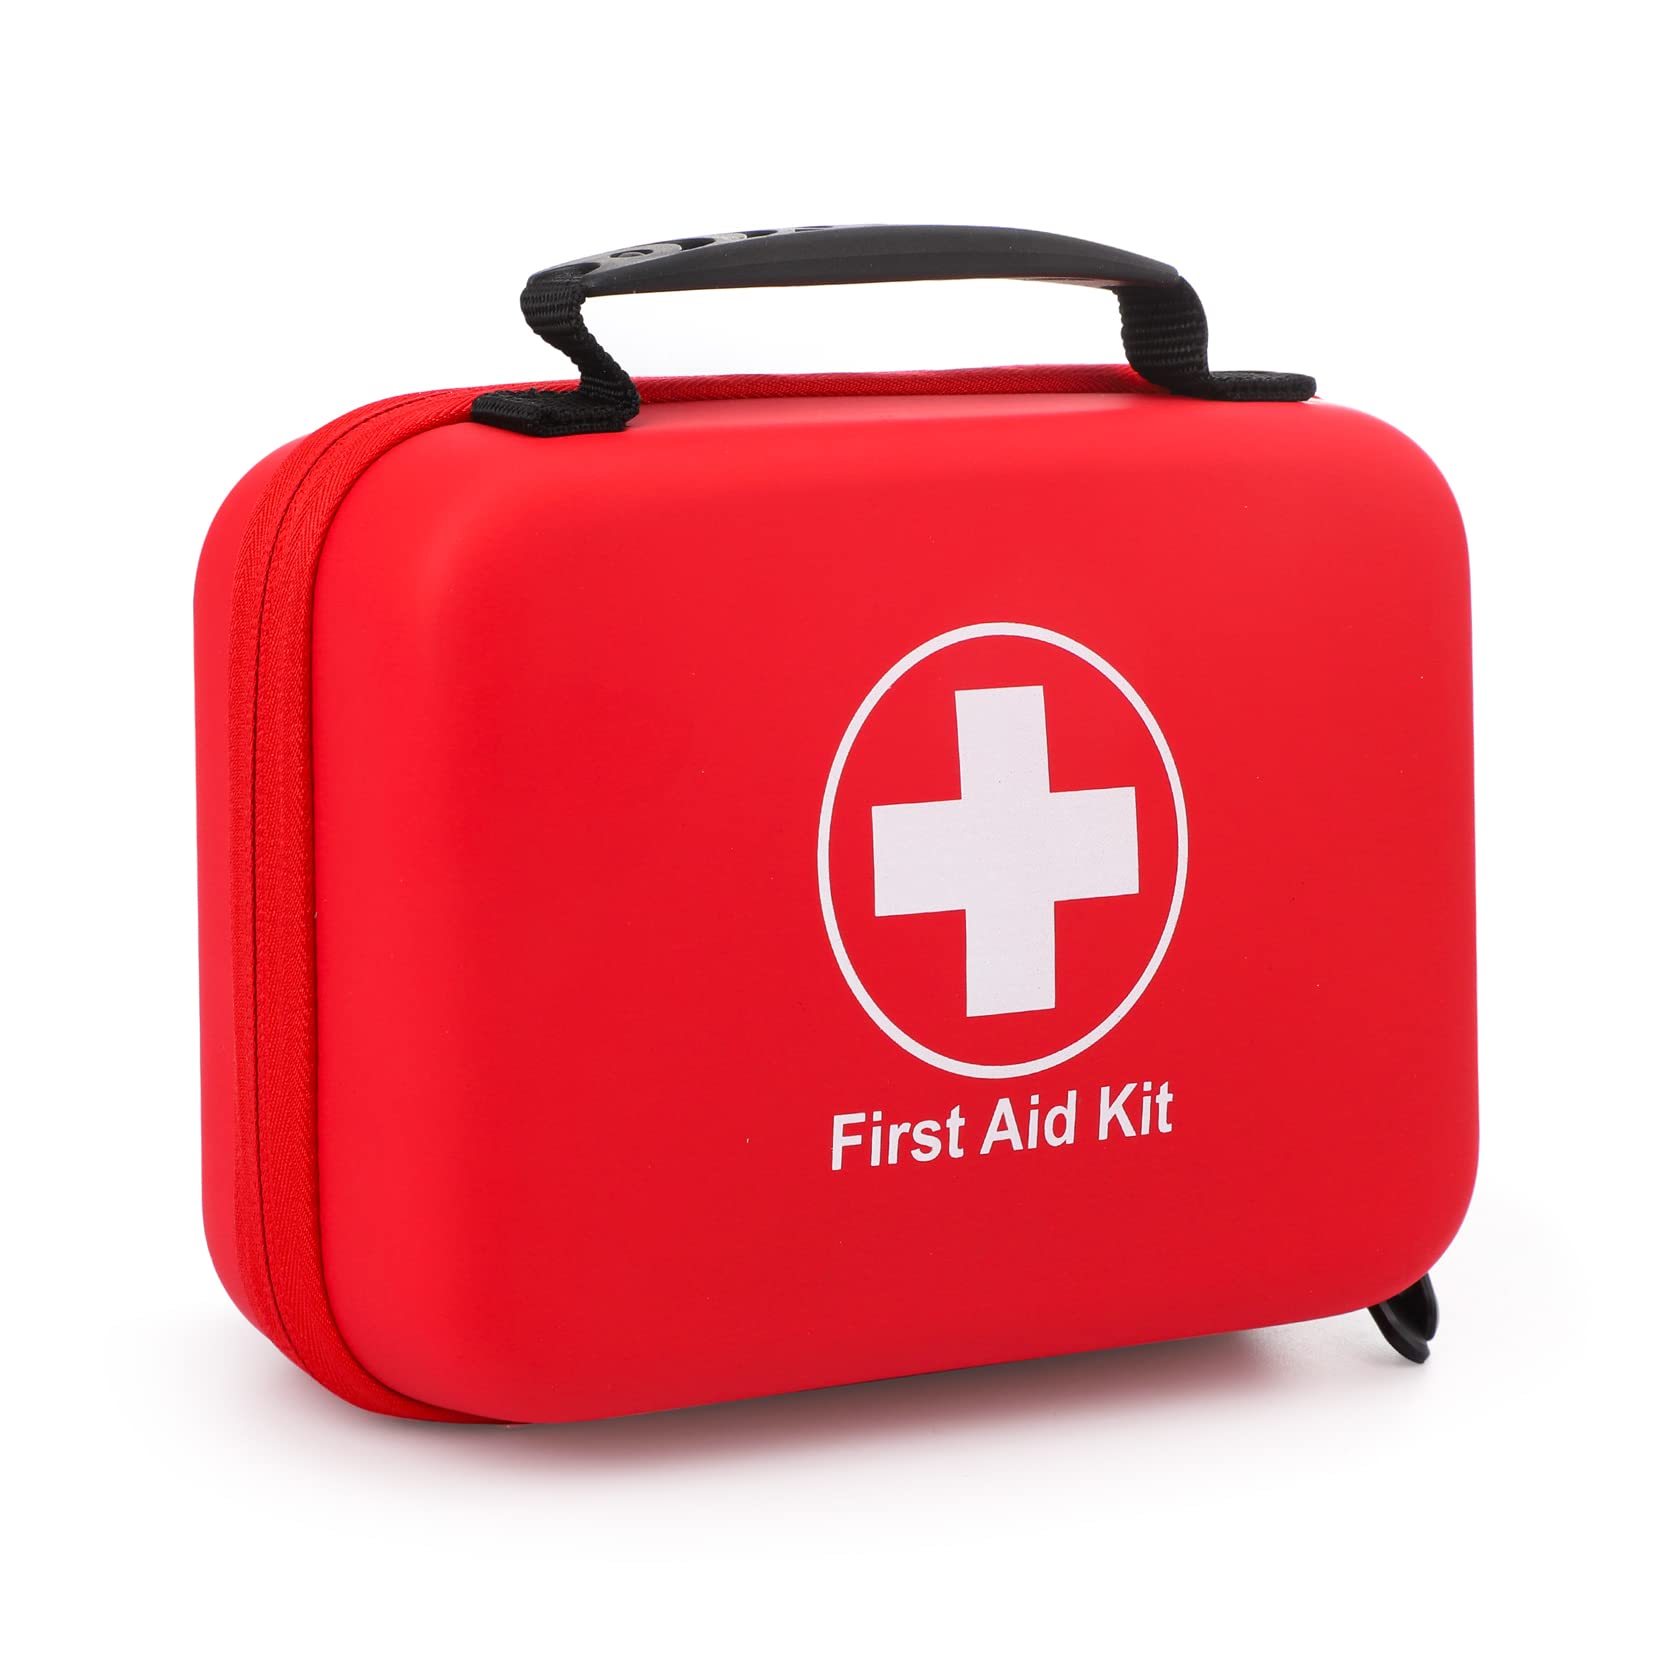 Portable First Aid Kit, 237 Pieces Medical Emergency Rescue Bag for Car, Camping, Travel, Hiking, Sport, Home First Aid Essential Box, Waterproof